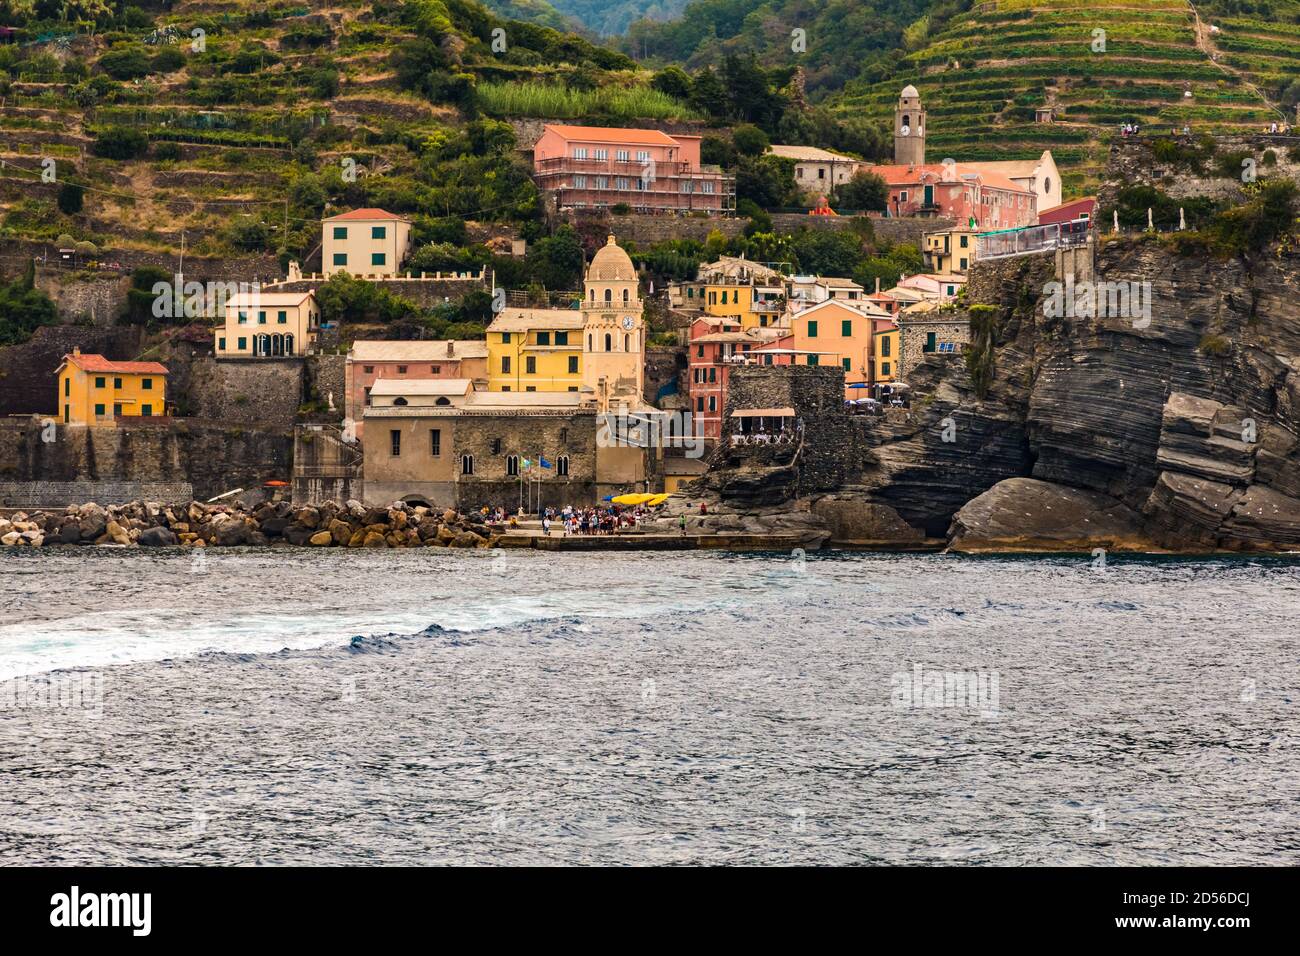 Lovely close-up view of Vernazza in the Cinque Terre coastal area from the sea. Colourful buildings, the Church of Santa Margherita d'Antiochia and... Stock Photo